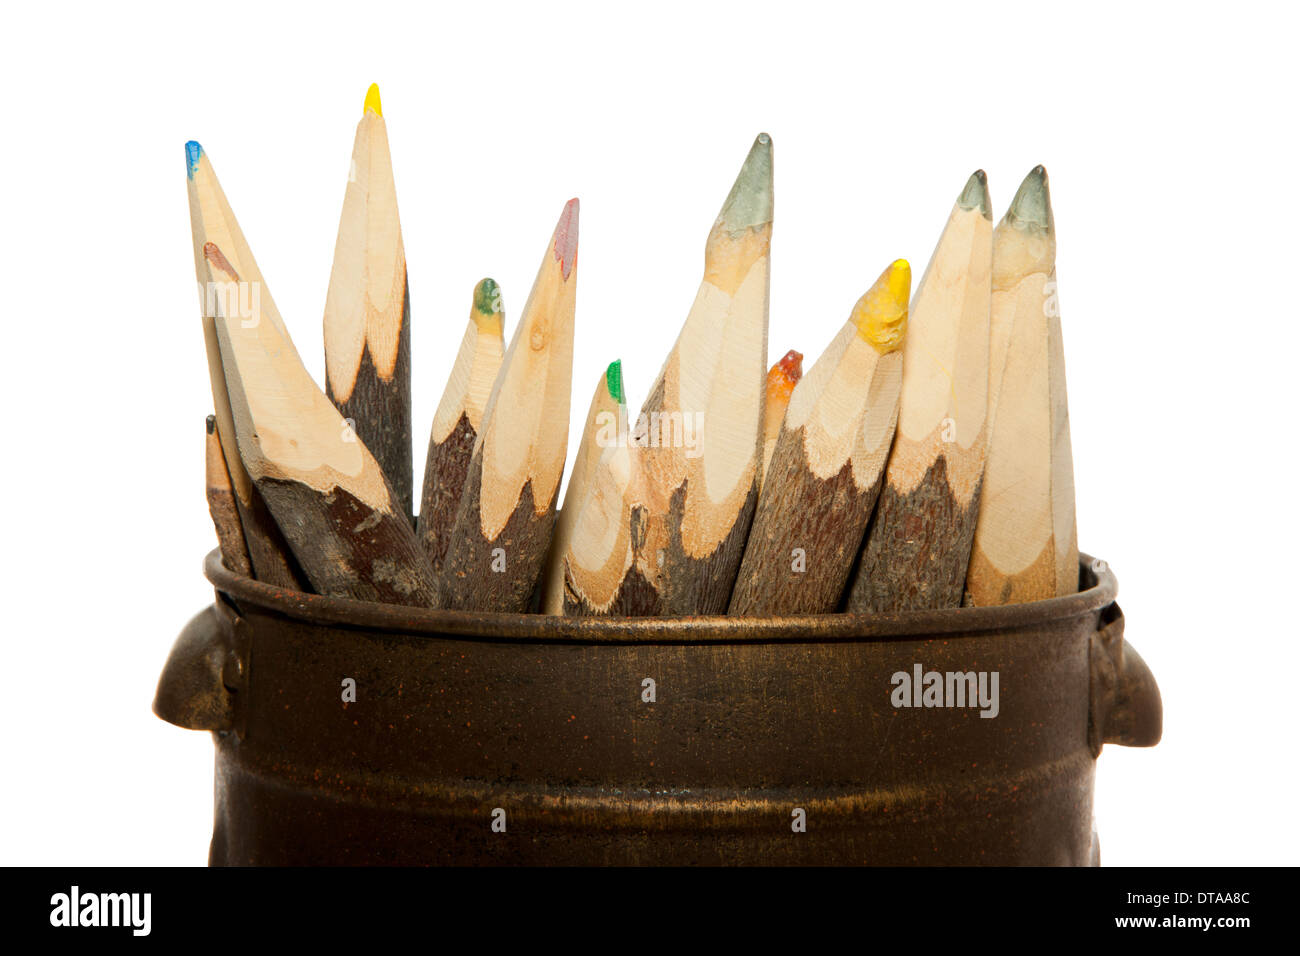 Unique sharp wooden Pencils isolated on white Stock Photo